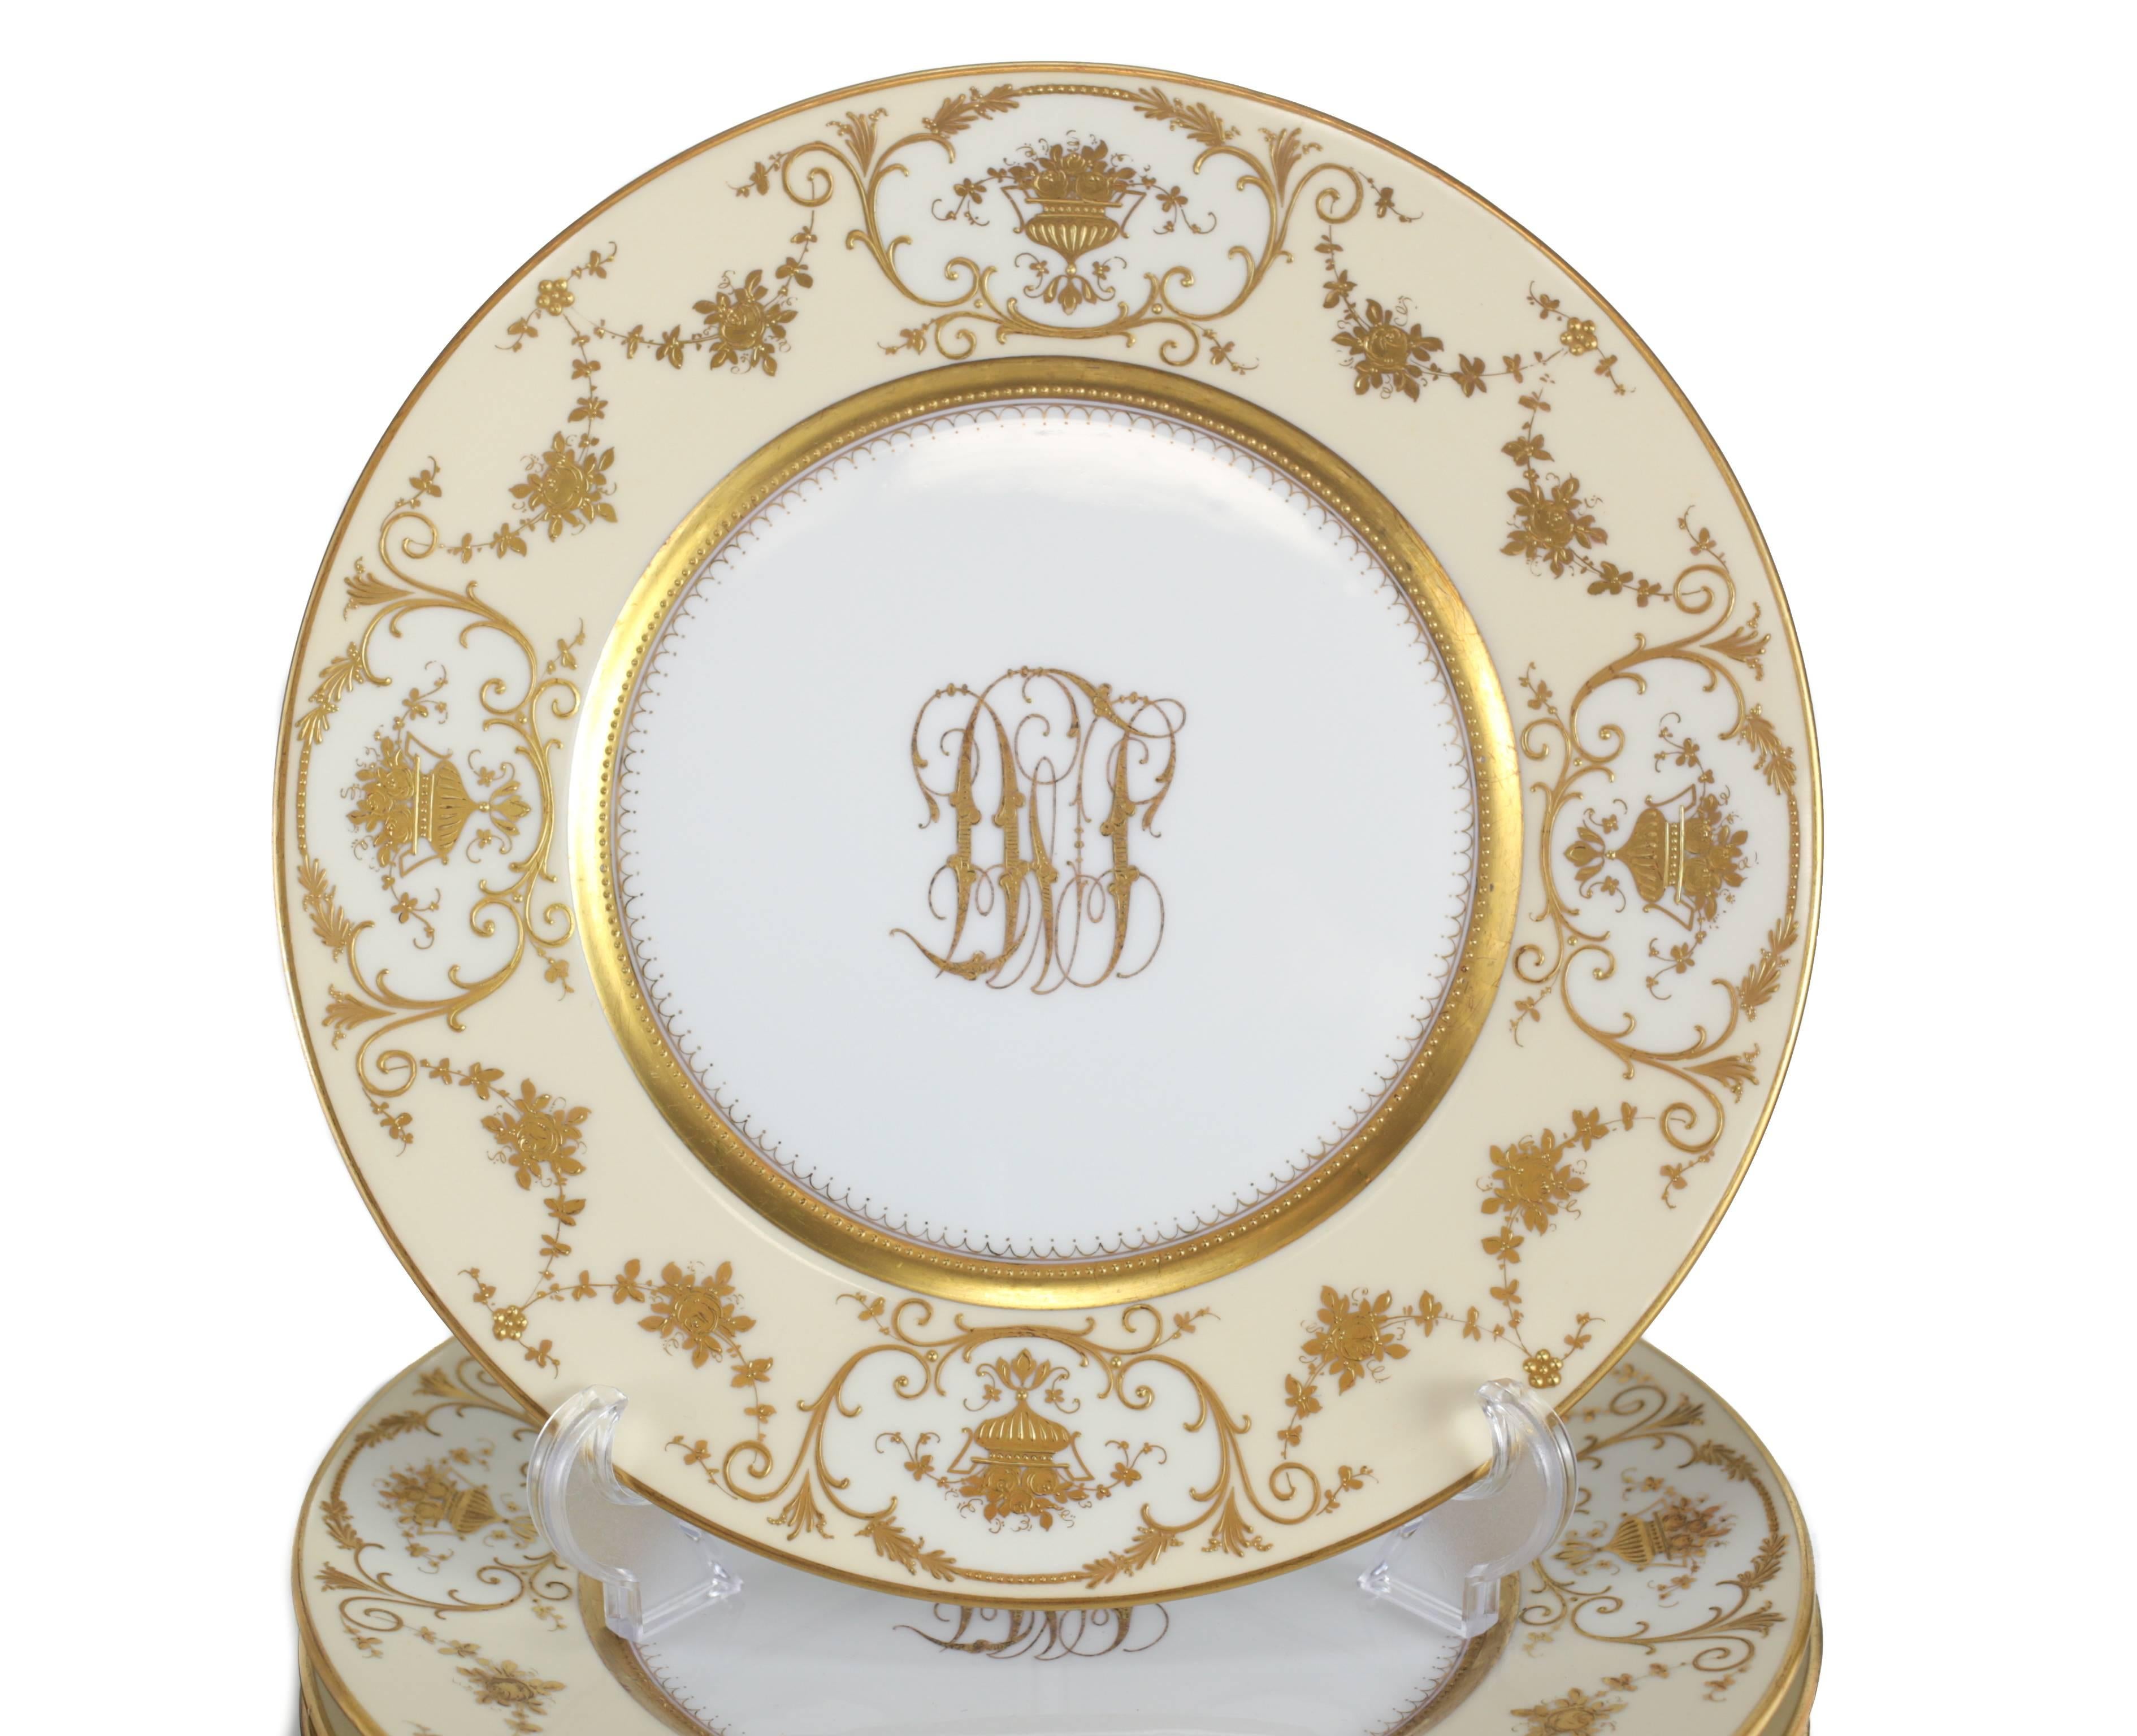 A lovely dinner service for twelve by Dresden, Germany consisting of 12 dinner plates, 12 salad plates and 12 bread and butter plates. The plates are manufactured by Rosenthal of Selb-Bavaria and were designed and painted by Dresden in Germany. Each